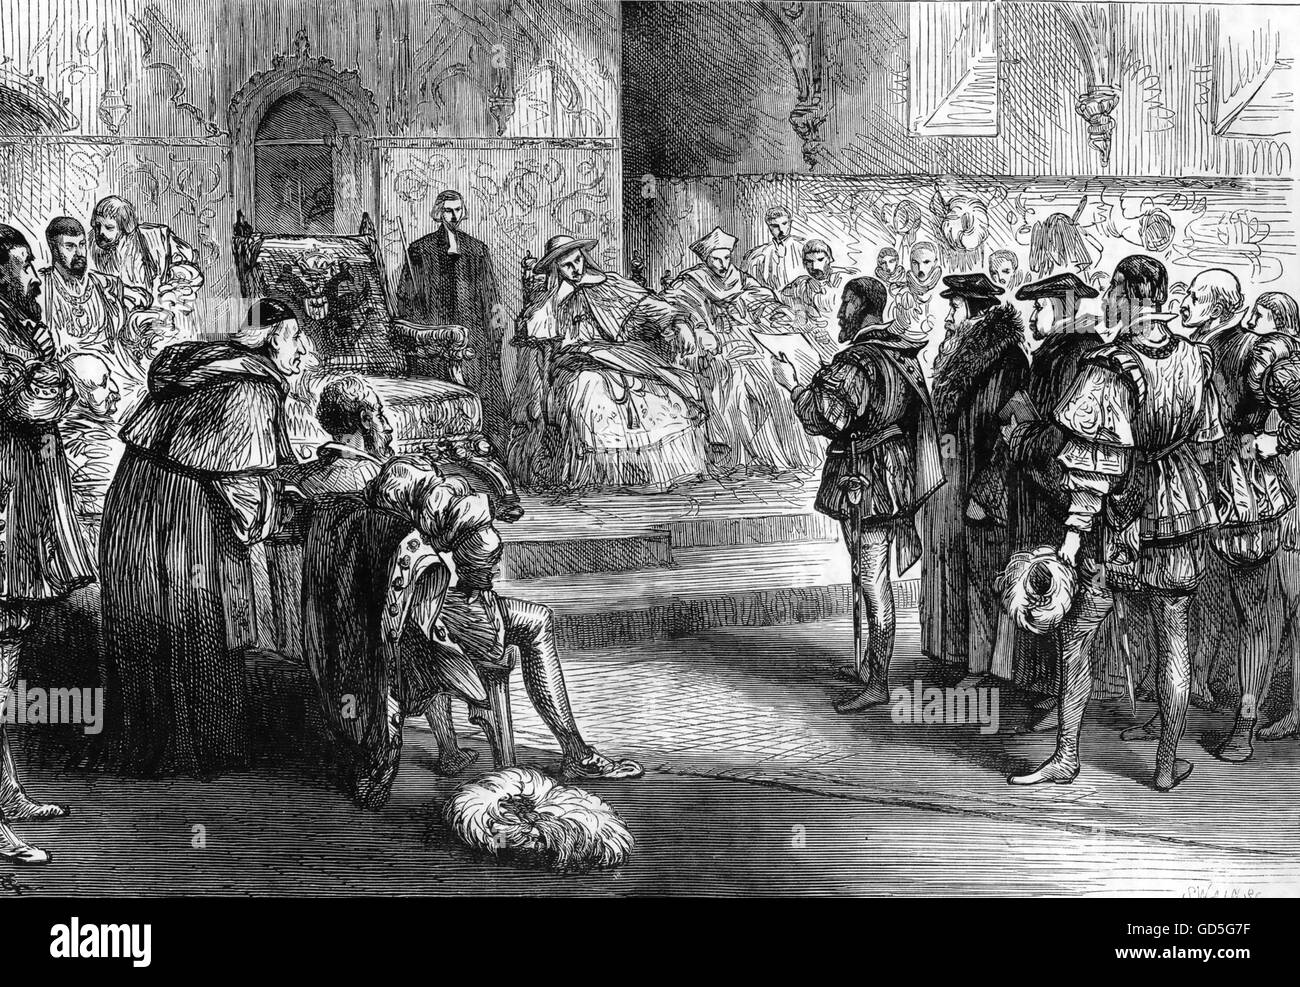 DIET OF SPEYERS 1529 The Elector of Saxony reading the protest to Charles's regent Ferdinand while the Emperor's chair remains empty. A steel engraving about 1850 Stock Photo